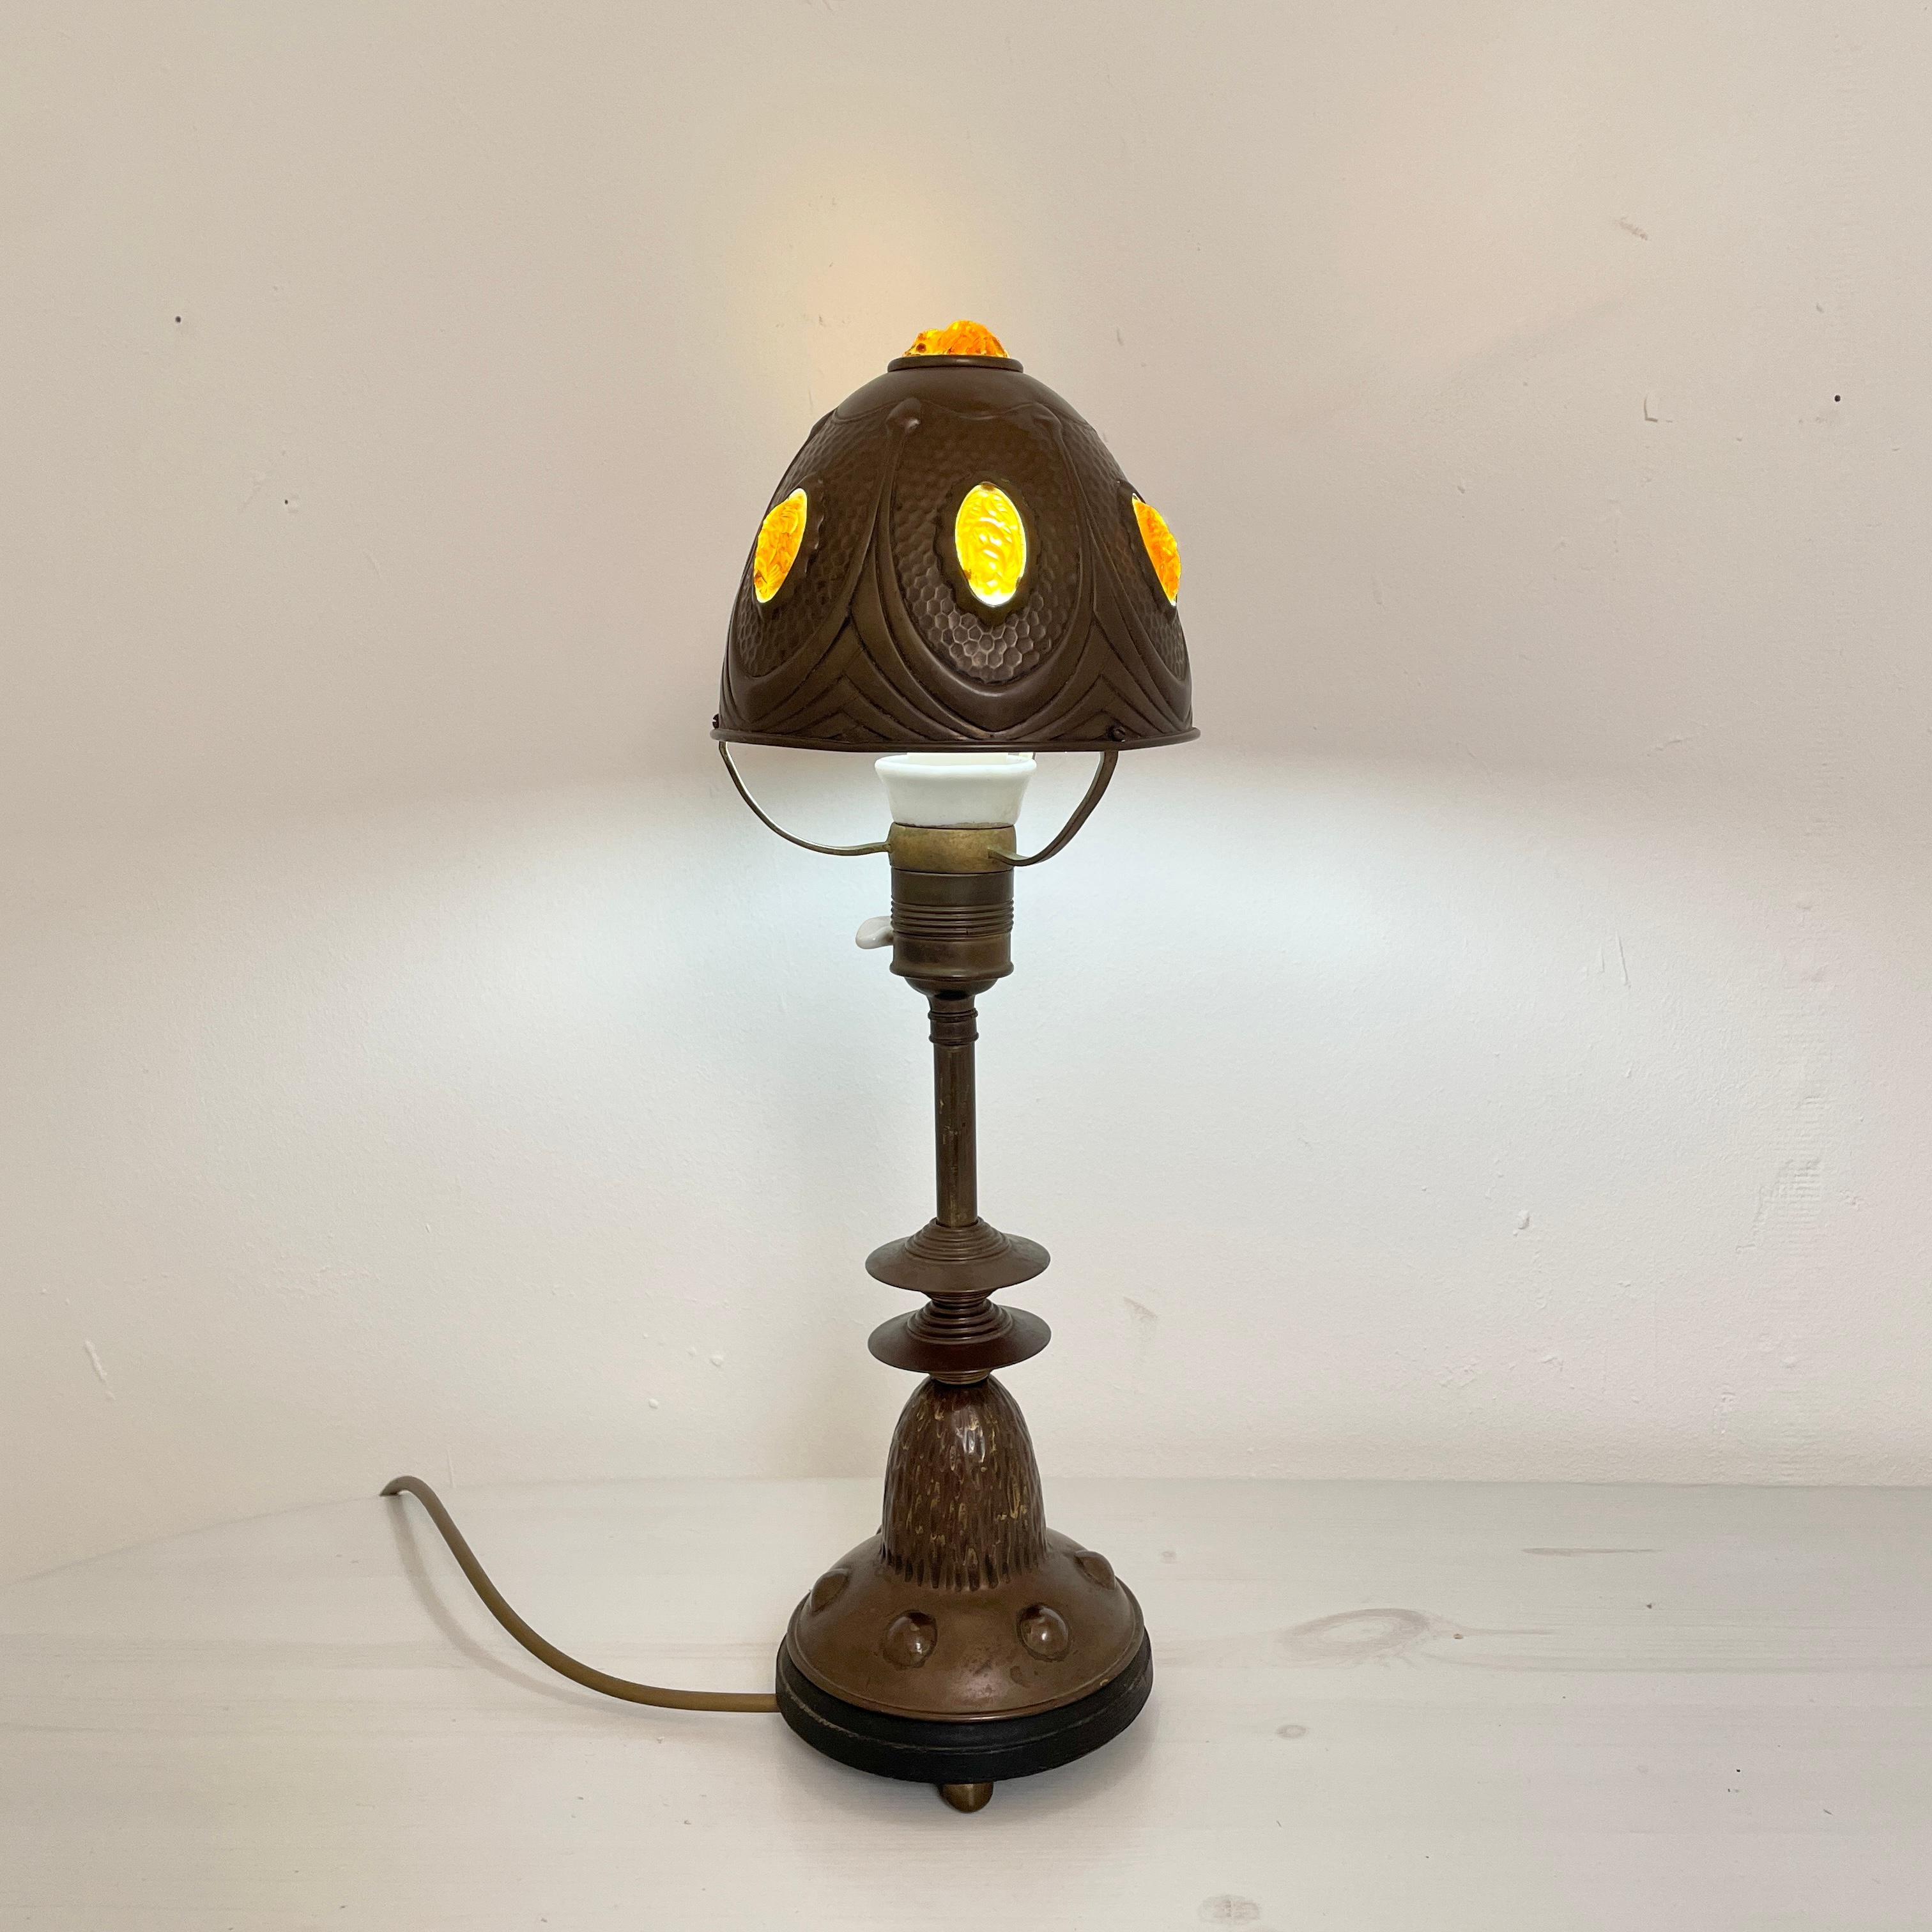 This German Art Deco Table Lamp in Brass and colored Glass was made around 1930.
A unique piece which is a great eye-catcher for your antique, modern, space age or mid-century interior.
If you have any more questions we are very happy to help and